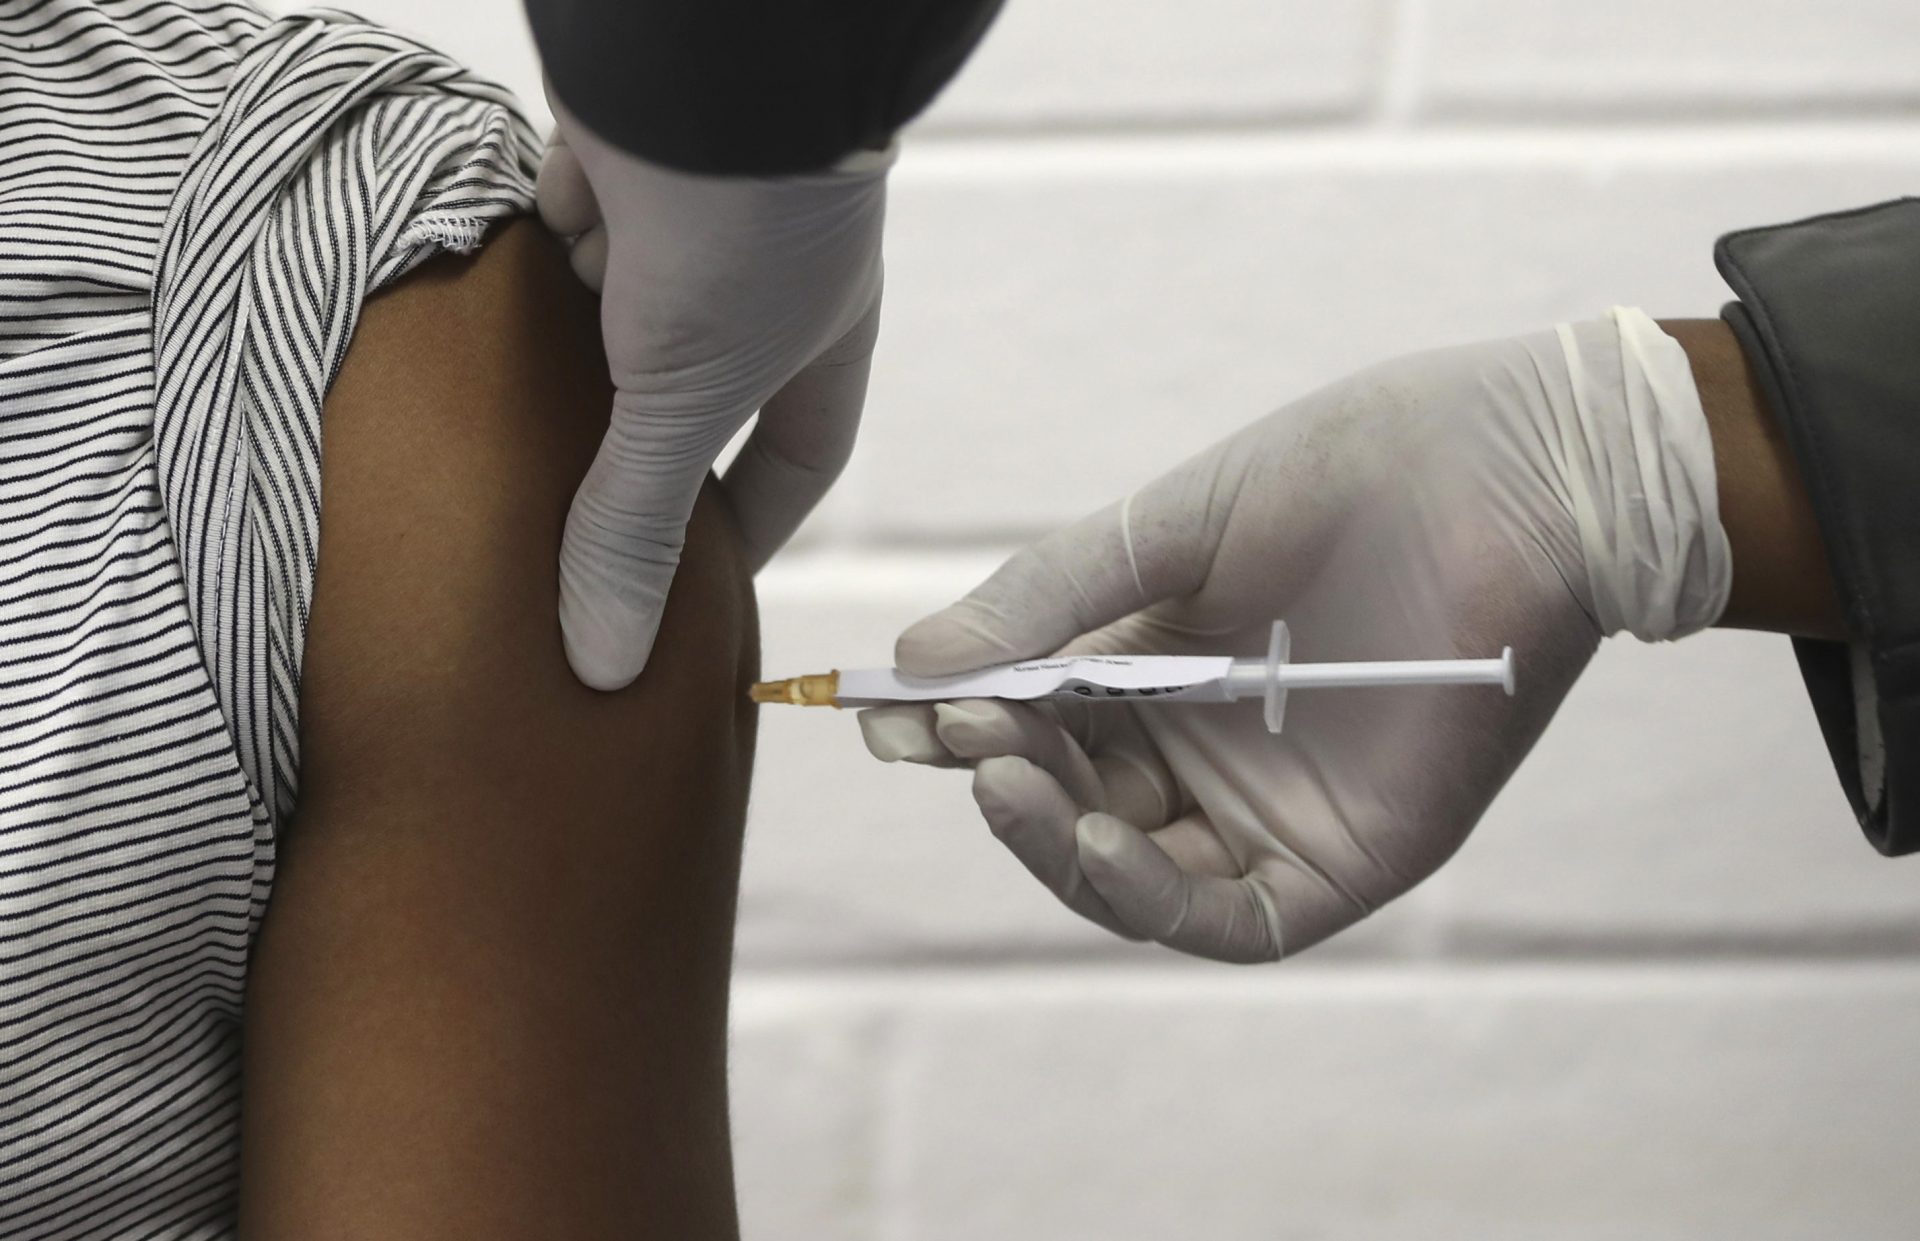 A volunteer receives an injection developed at the University of Oxford as part of a COVID-19 vaccine trial at the Chris Hani Baragwanath hospital in Soweto, Johannesburg Wednesday, June 24, 2020.